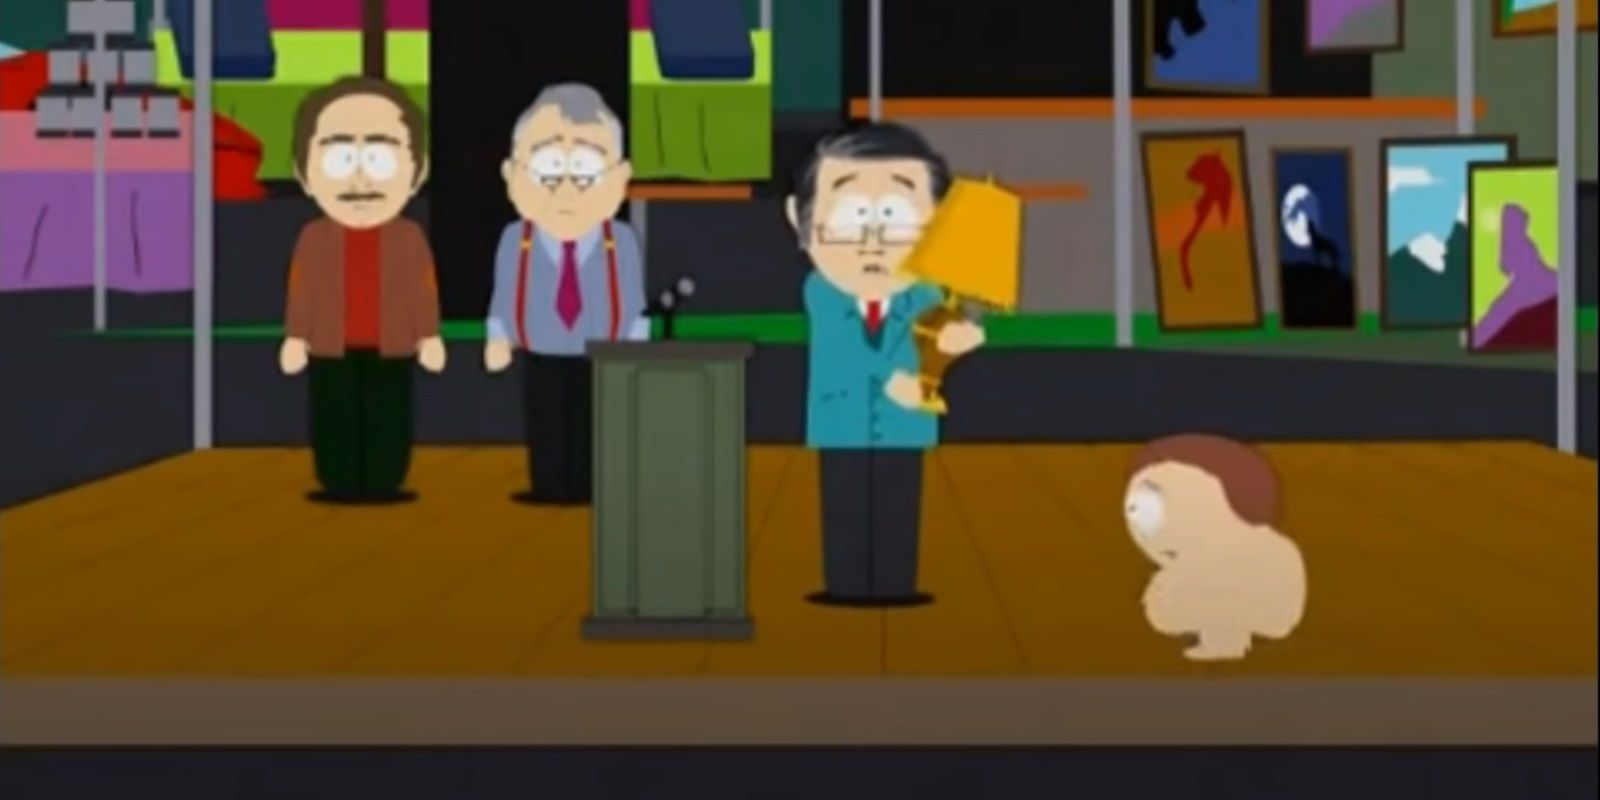 South Park The Most Memorable Scene From Each Of IMDbs 10 TopRated Episodes